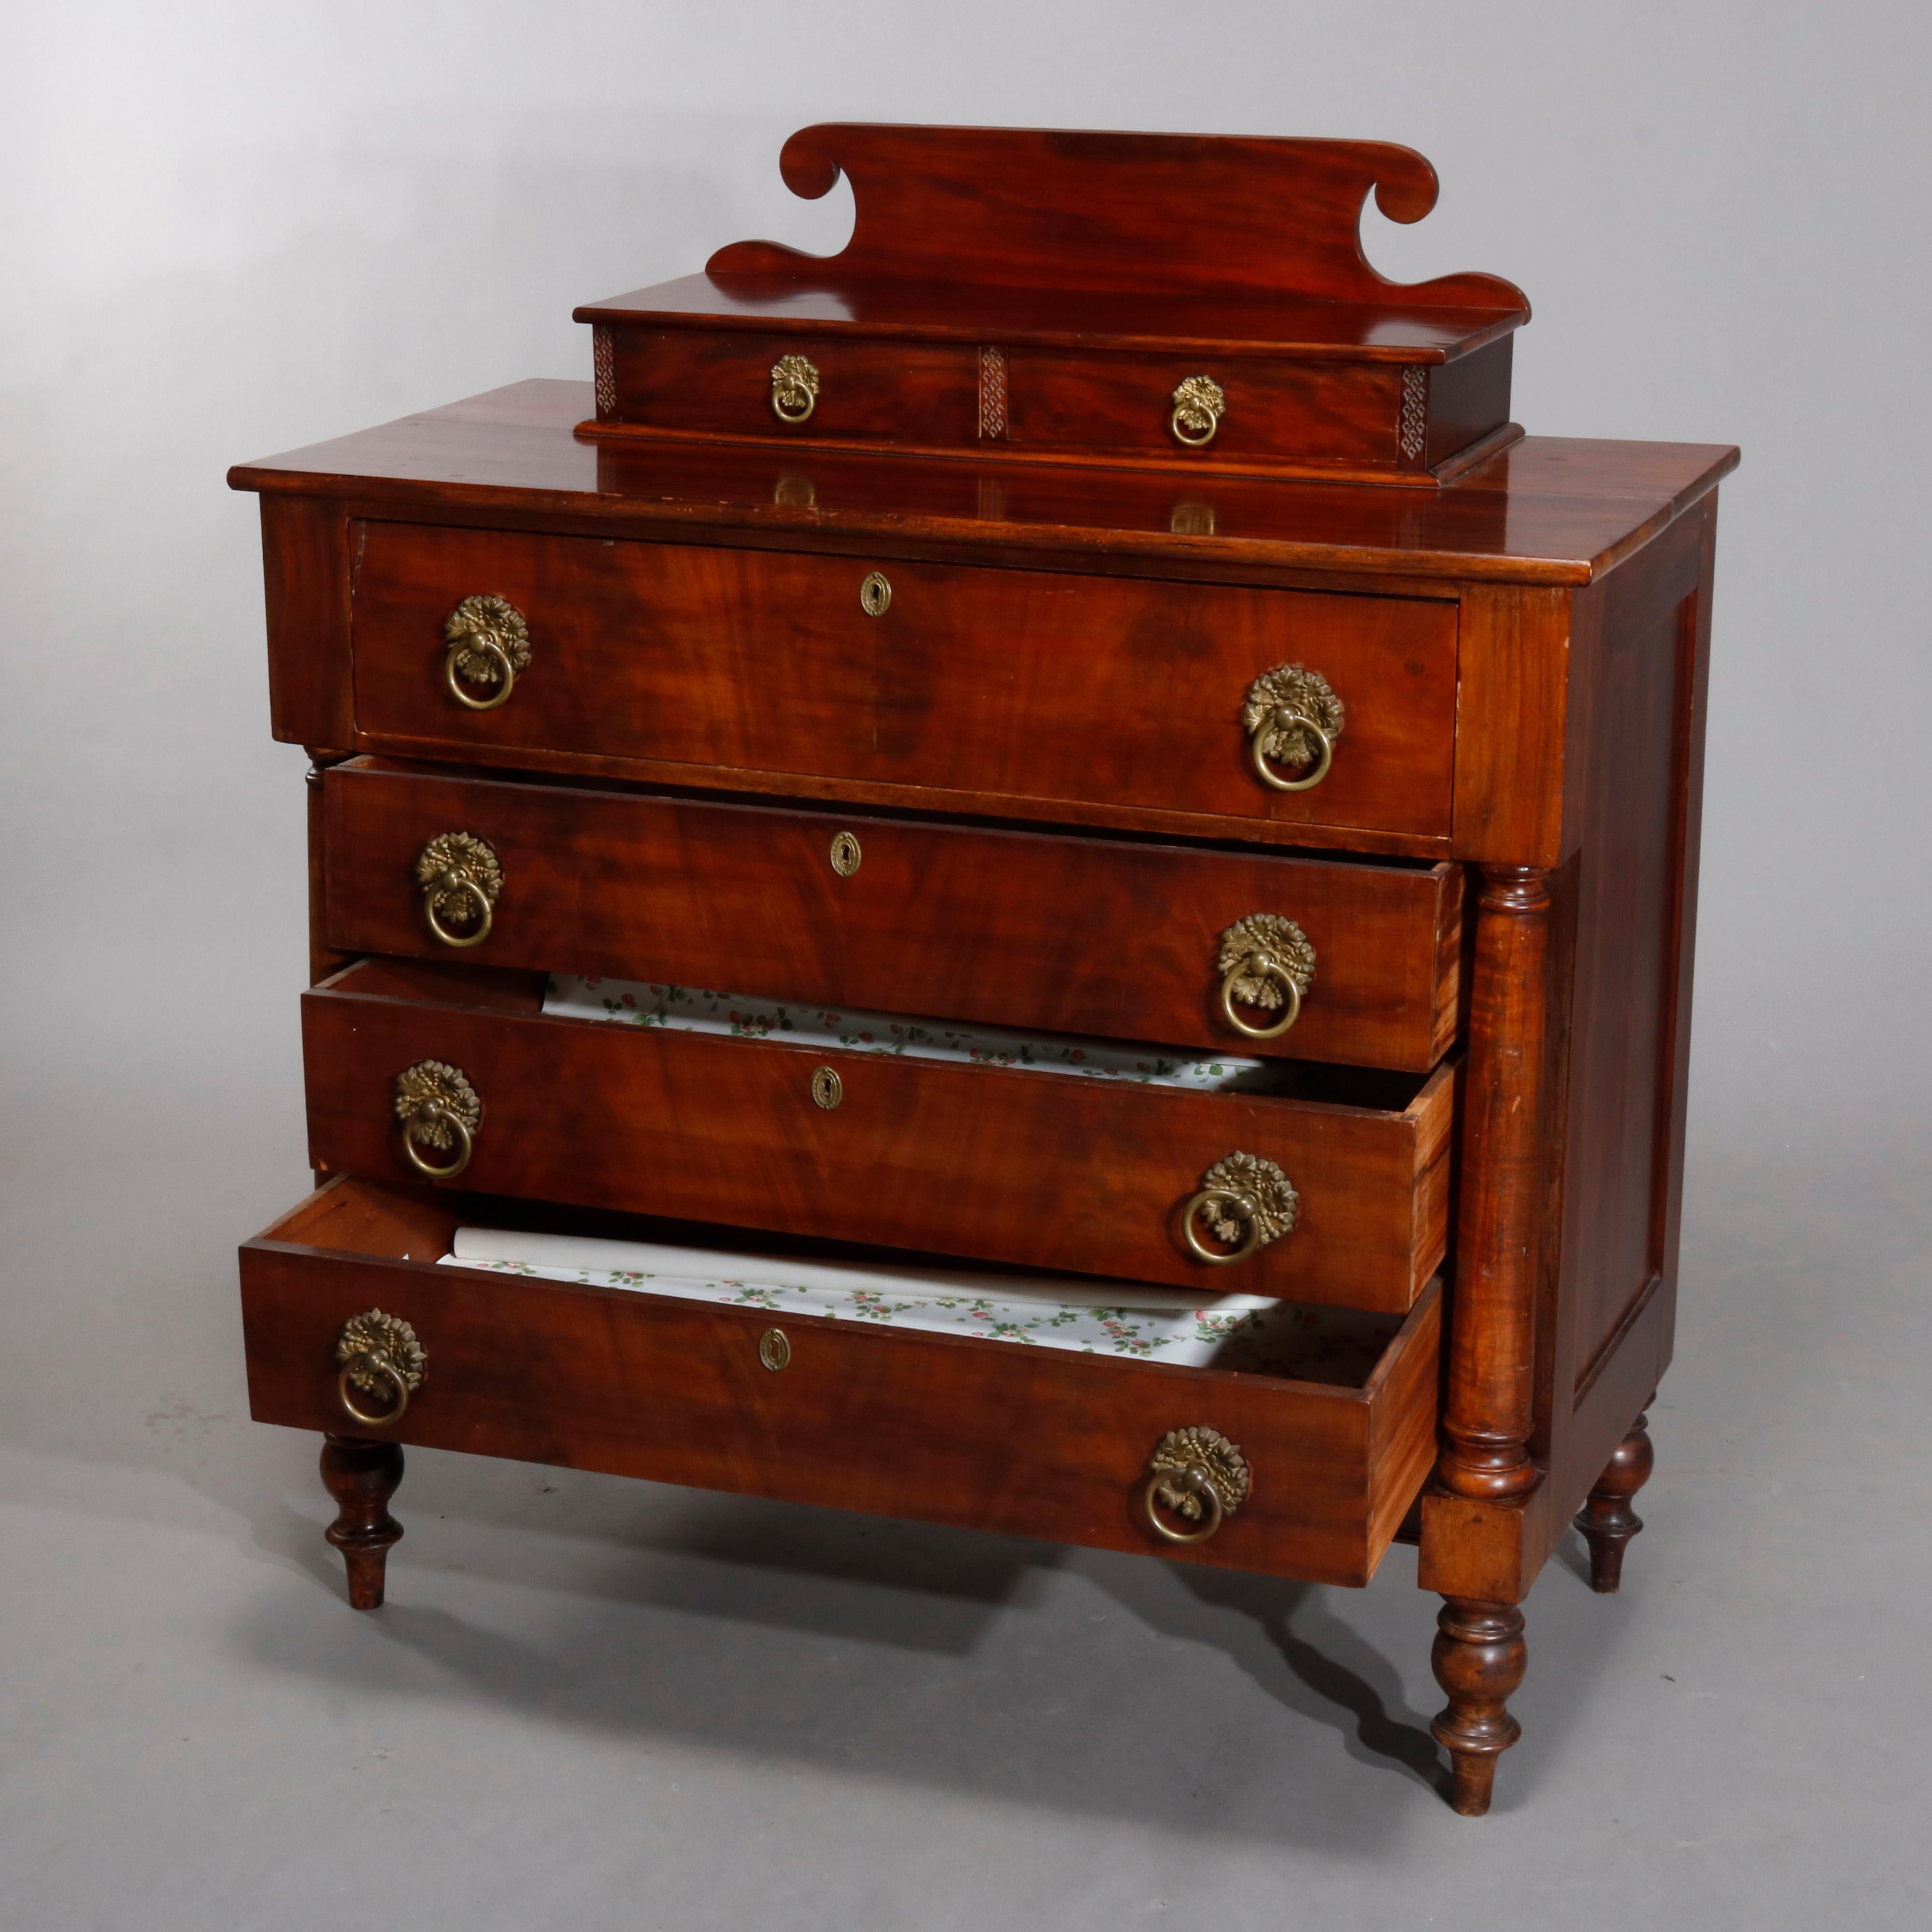 An antique Sheraton chest of drawers offers mahogany construction with scrolled backsplash and two glove boxes surmounting paneled case with large frieze drawer over three long drawers flanked with turned full columns, seated on turned turnip feet,